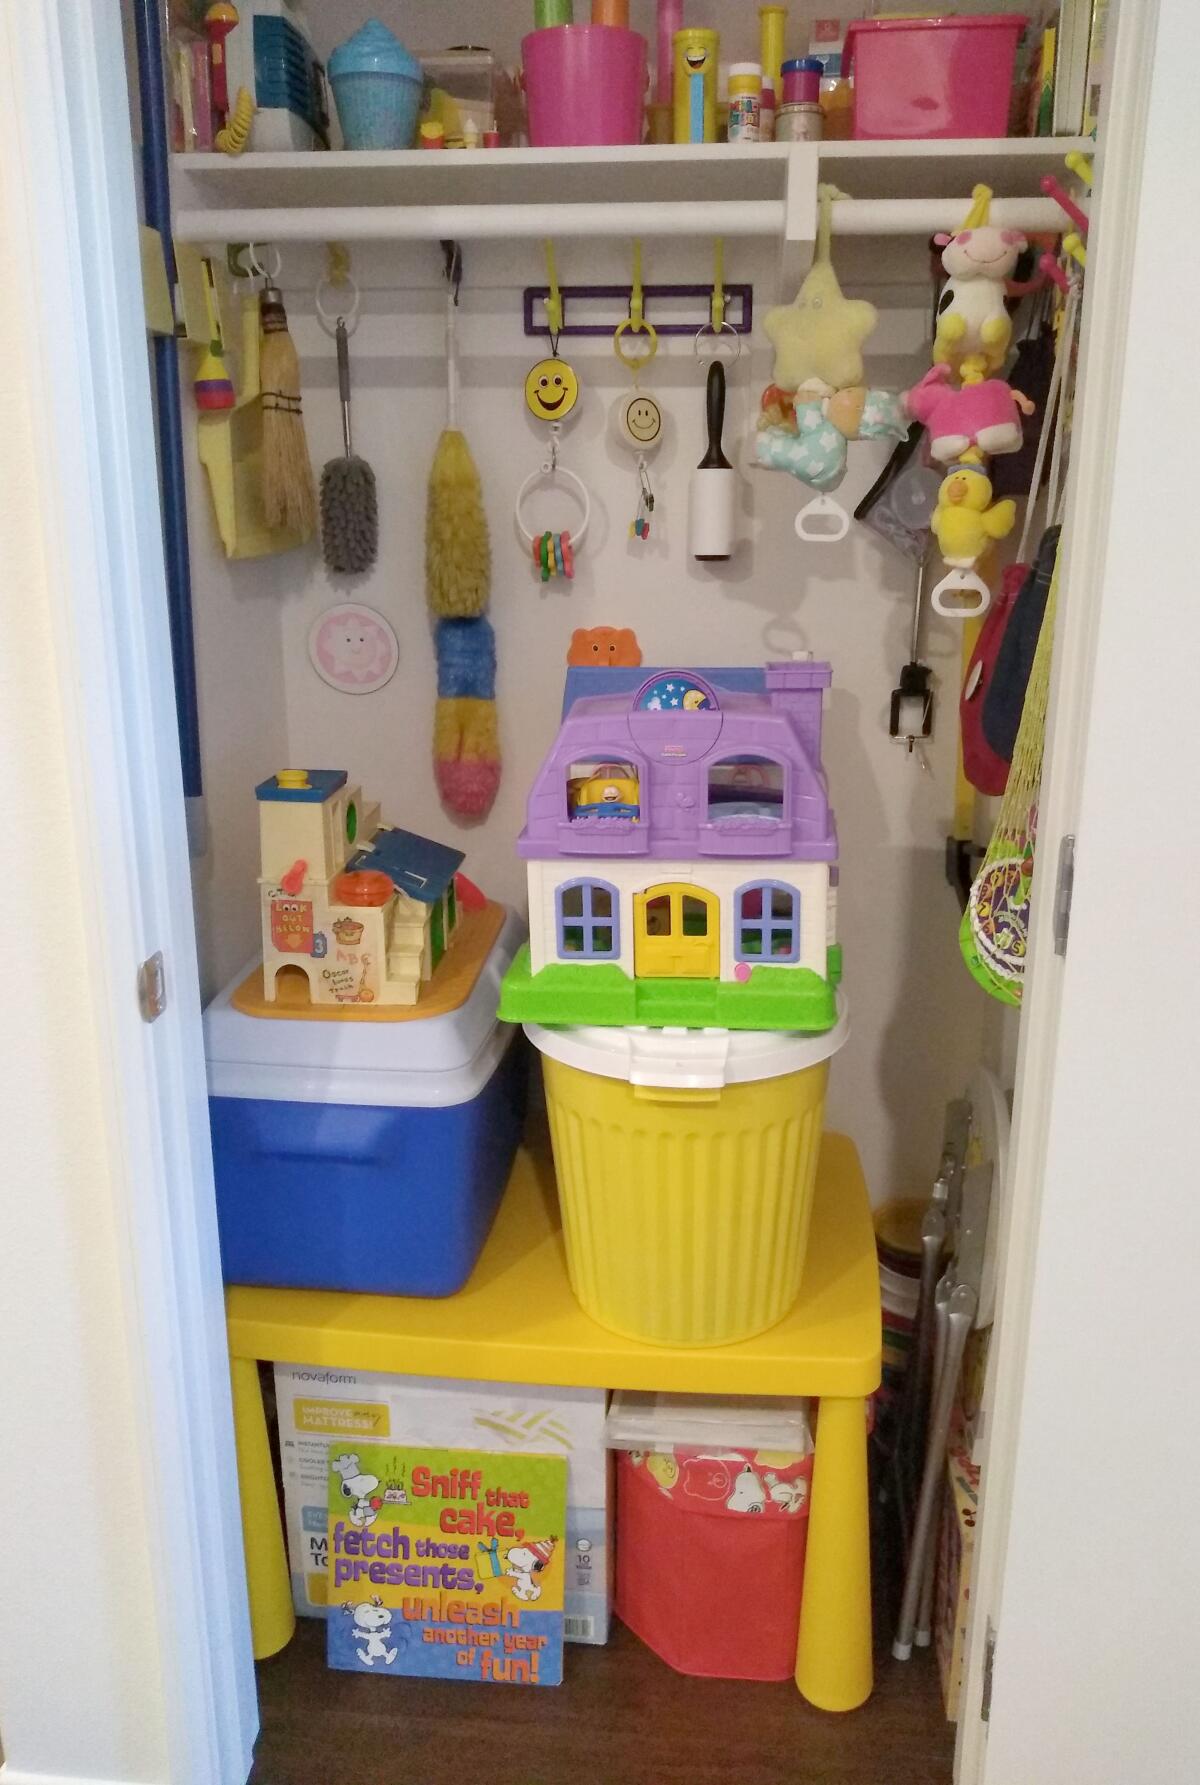 Ruthie Lawrence keeps all of her bright and cheerful belongings well organized in her apartment.